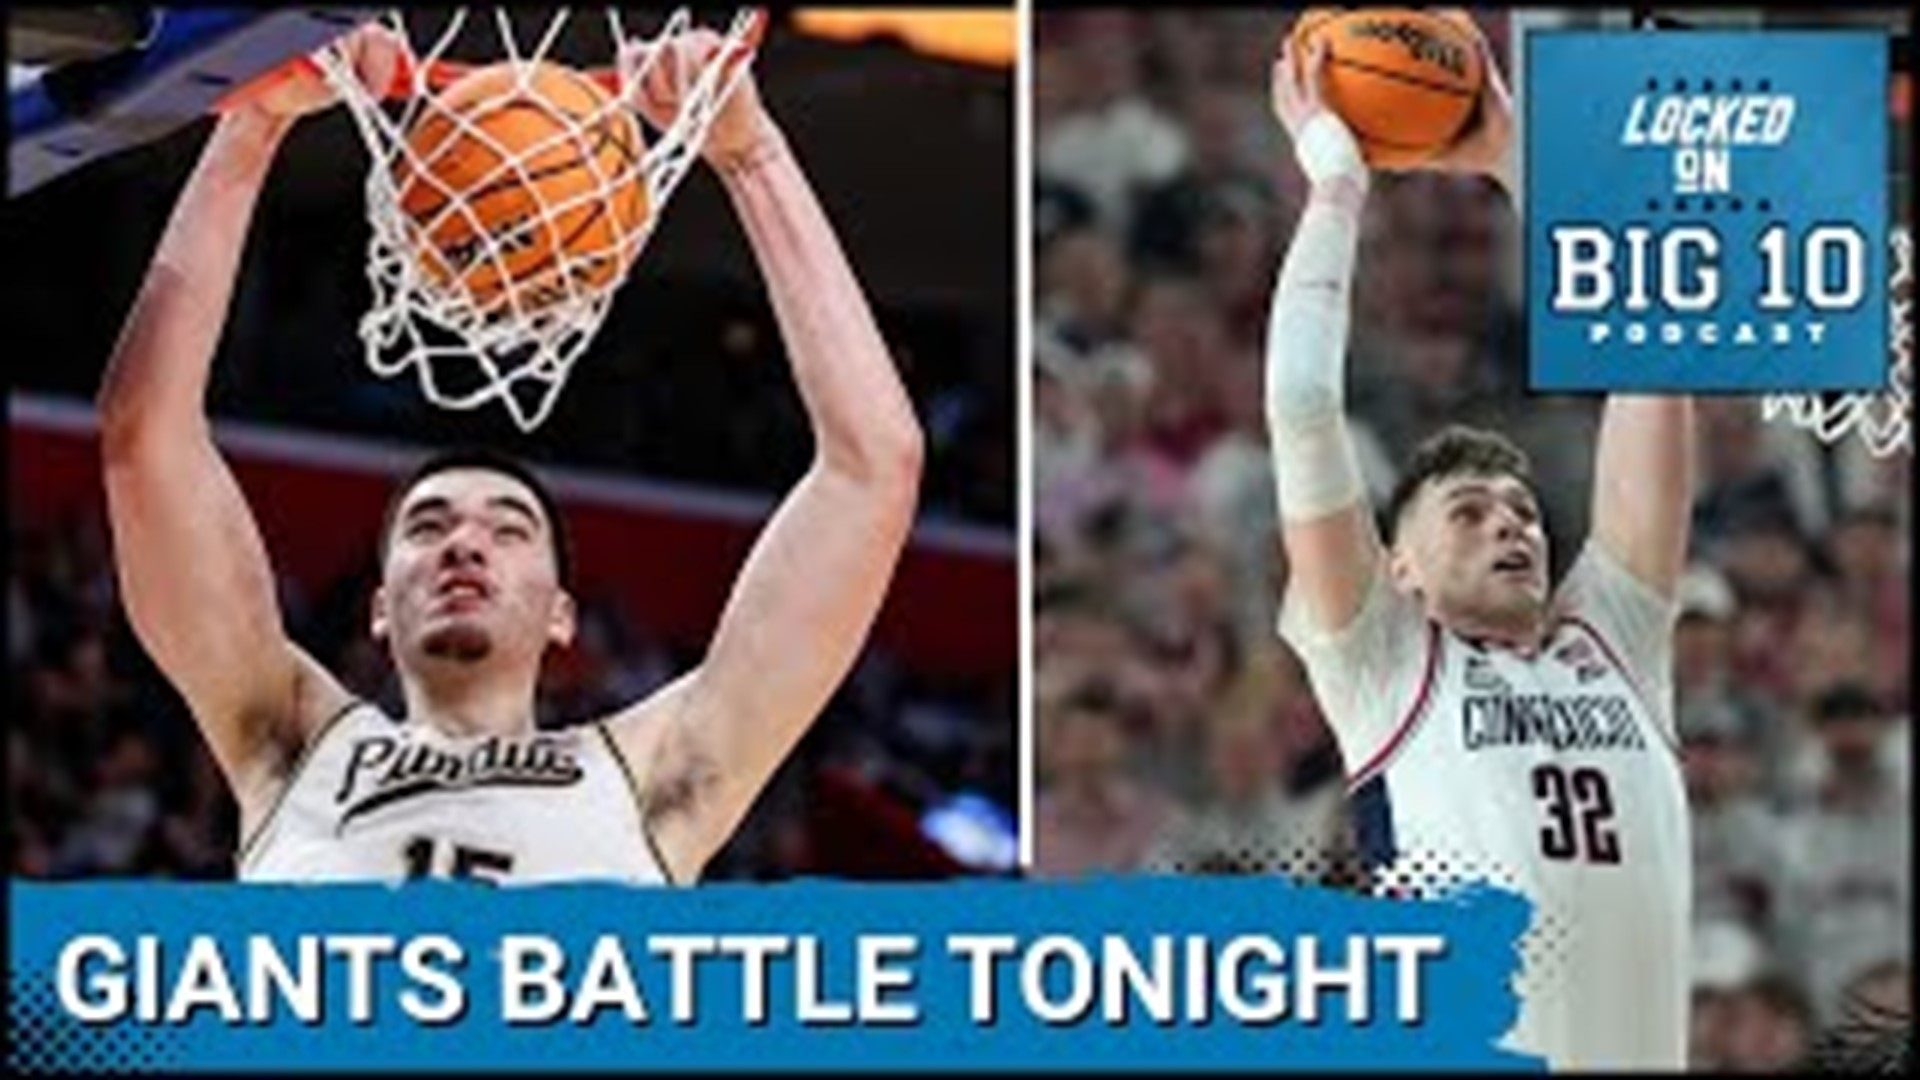 The Purdue Boilermakers and UConn Huskies battle tonight for the NCAA Tournament Championship for men's college basketball. Both teams are led by 7 footers.